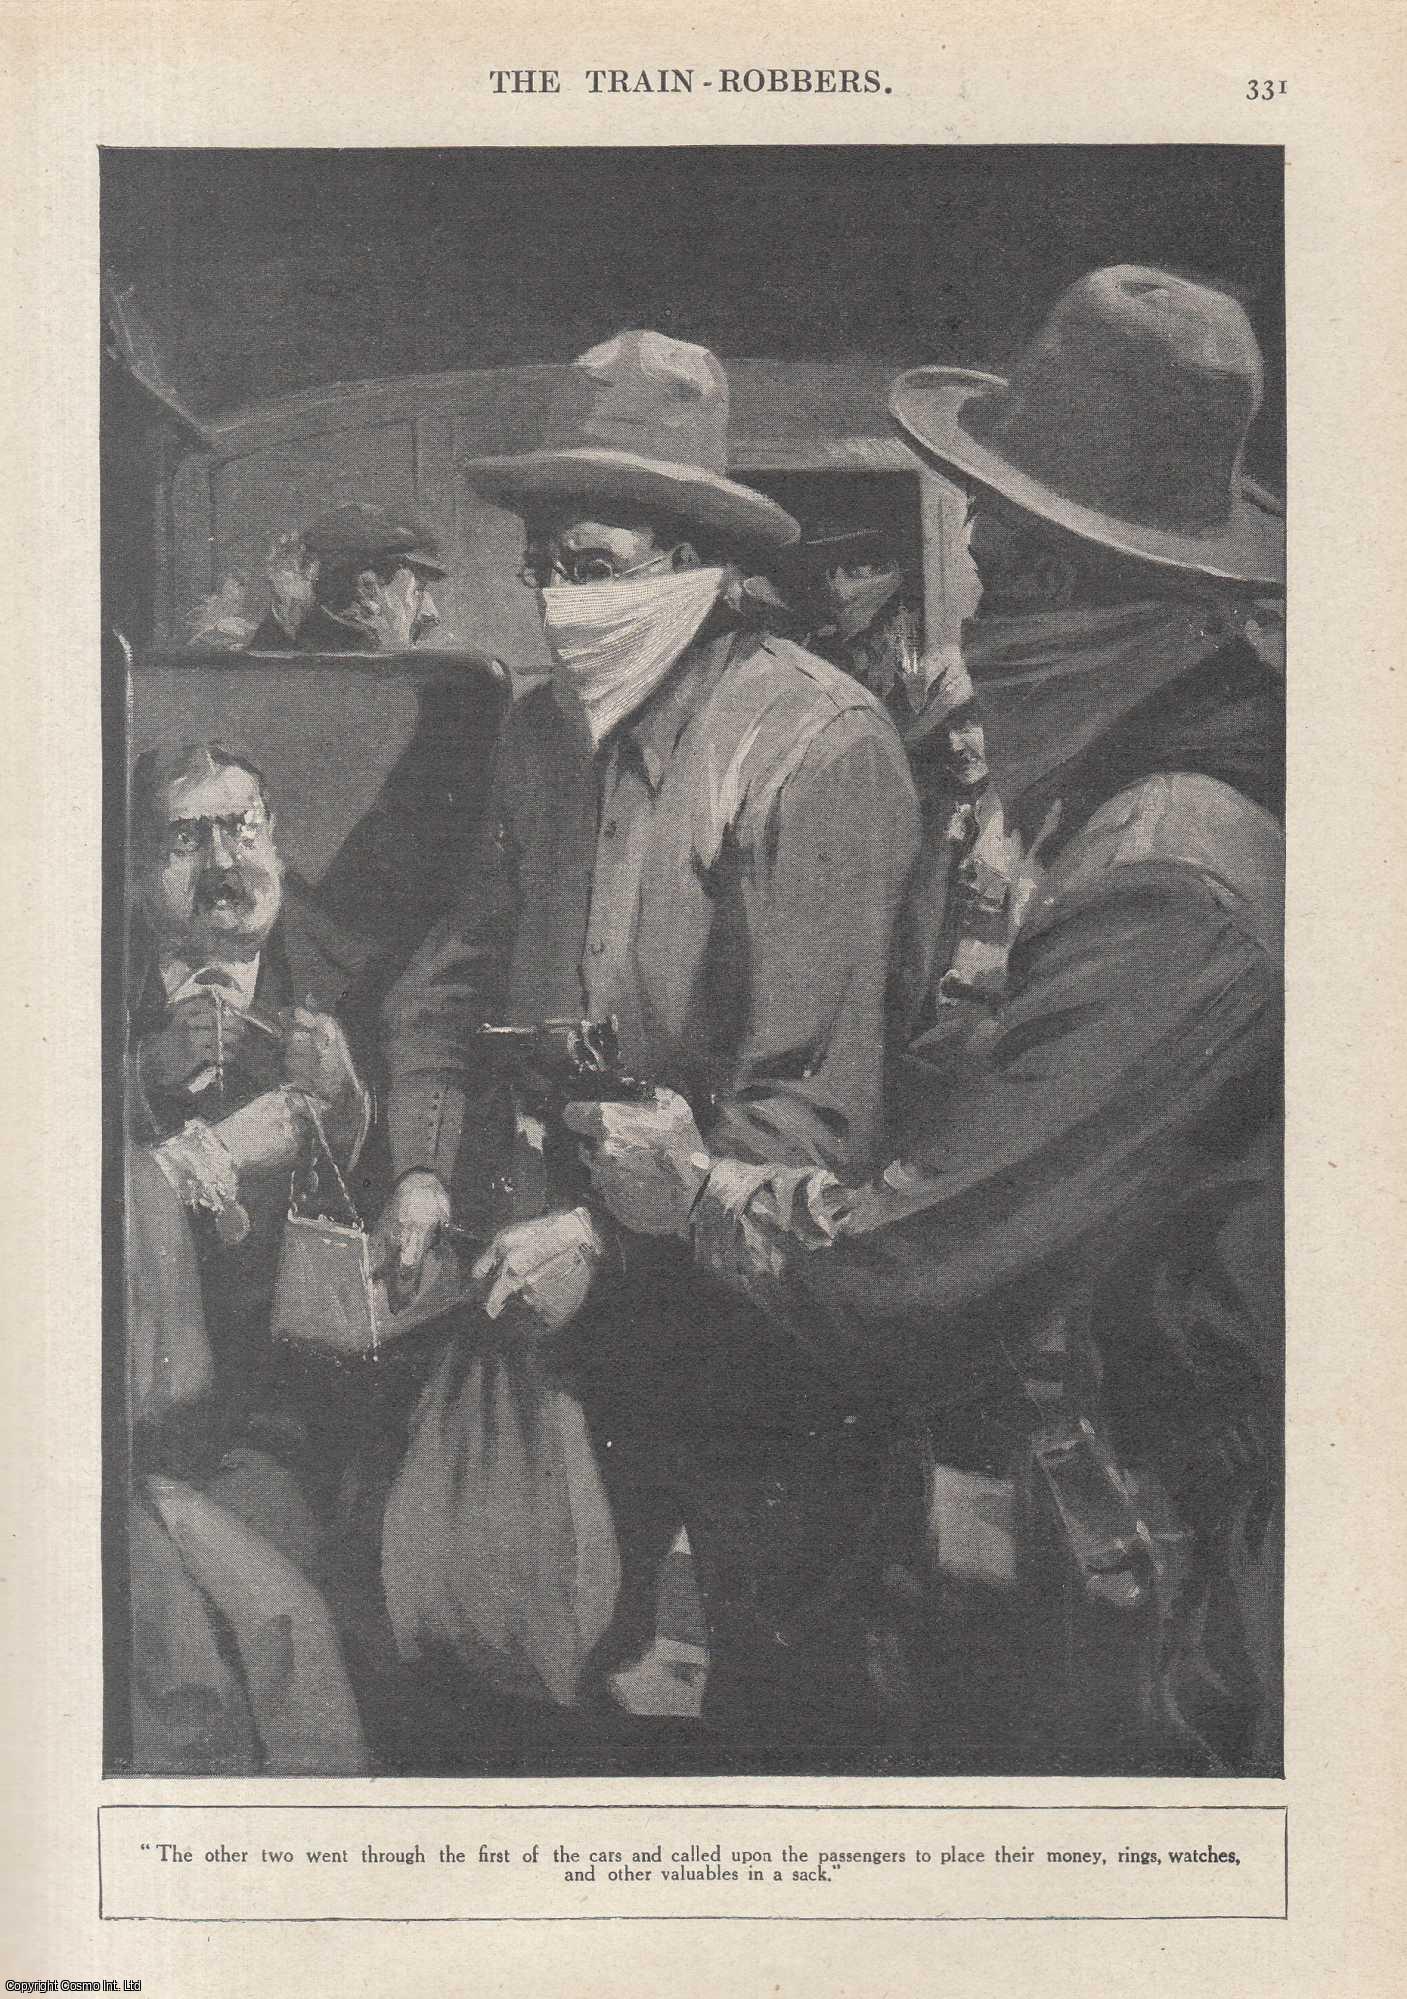 B.C. D'Easum, of Lemhi, Idaho, U.S.A. Illustrated by Arch. Webb. - The Train-Robbers : a story of a hold-up, on the Northern Pacific Railroad & the long man-hunt that followed. An uncommon original article from the Wide World Magazine, 1916.